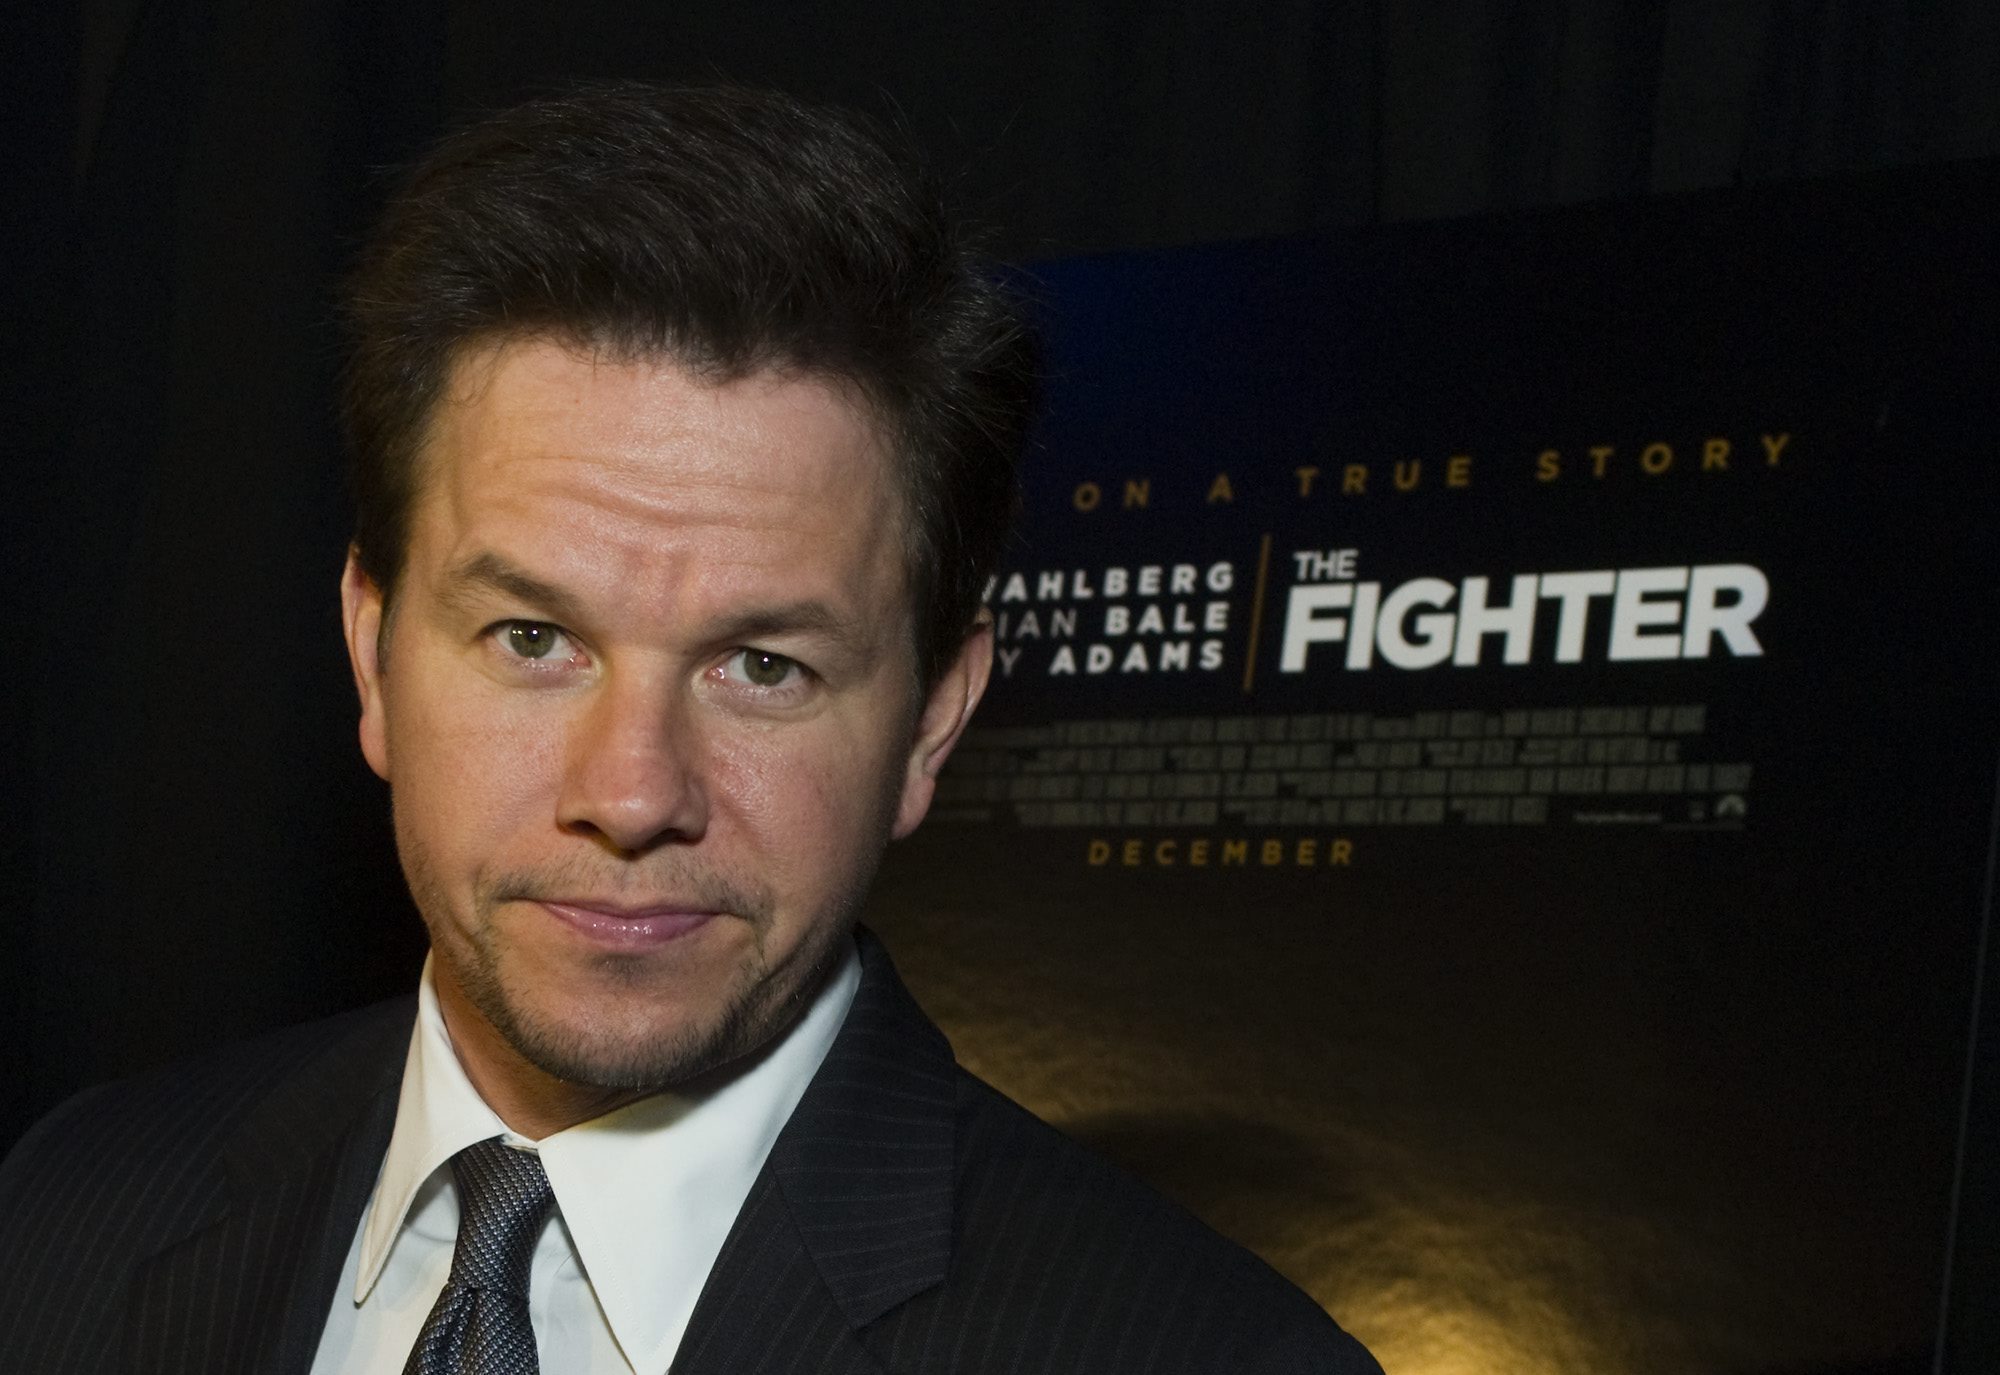 Christian Bale, Mickey Ward, Mark Wahlberg, The Fighter